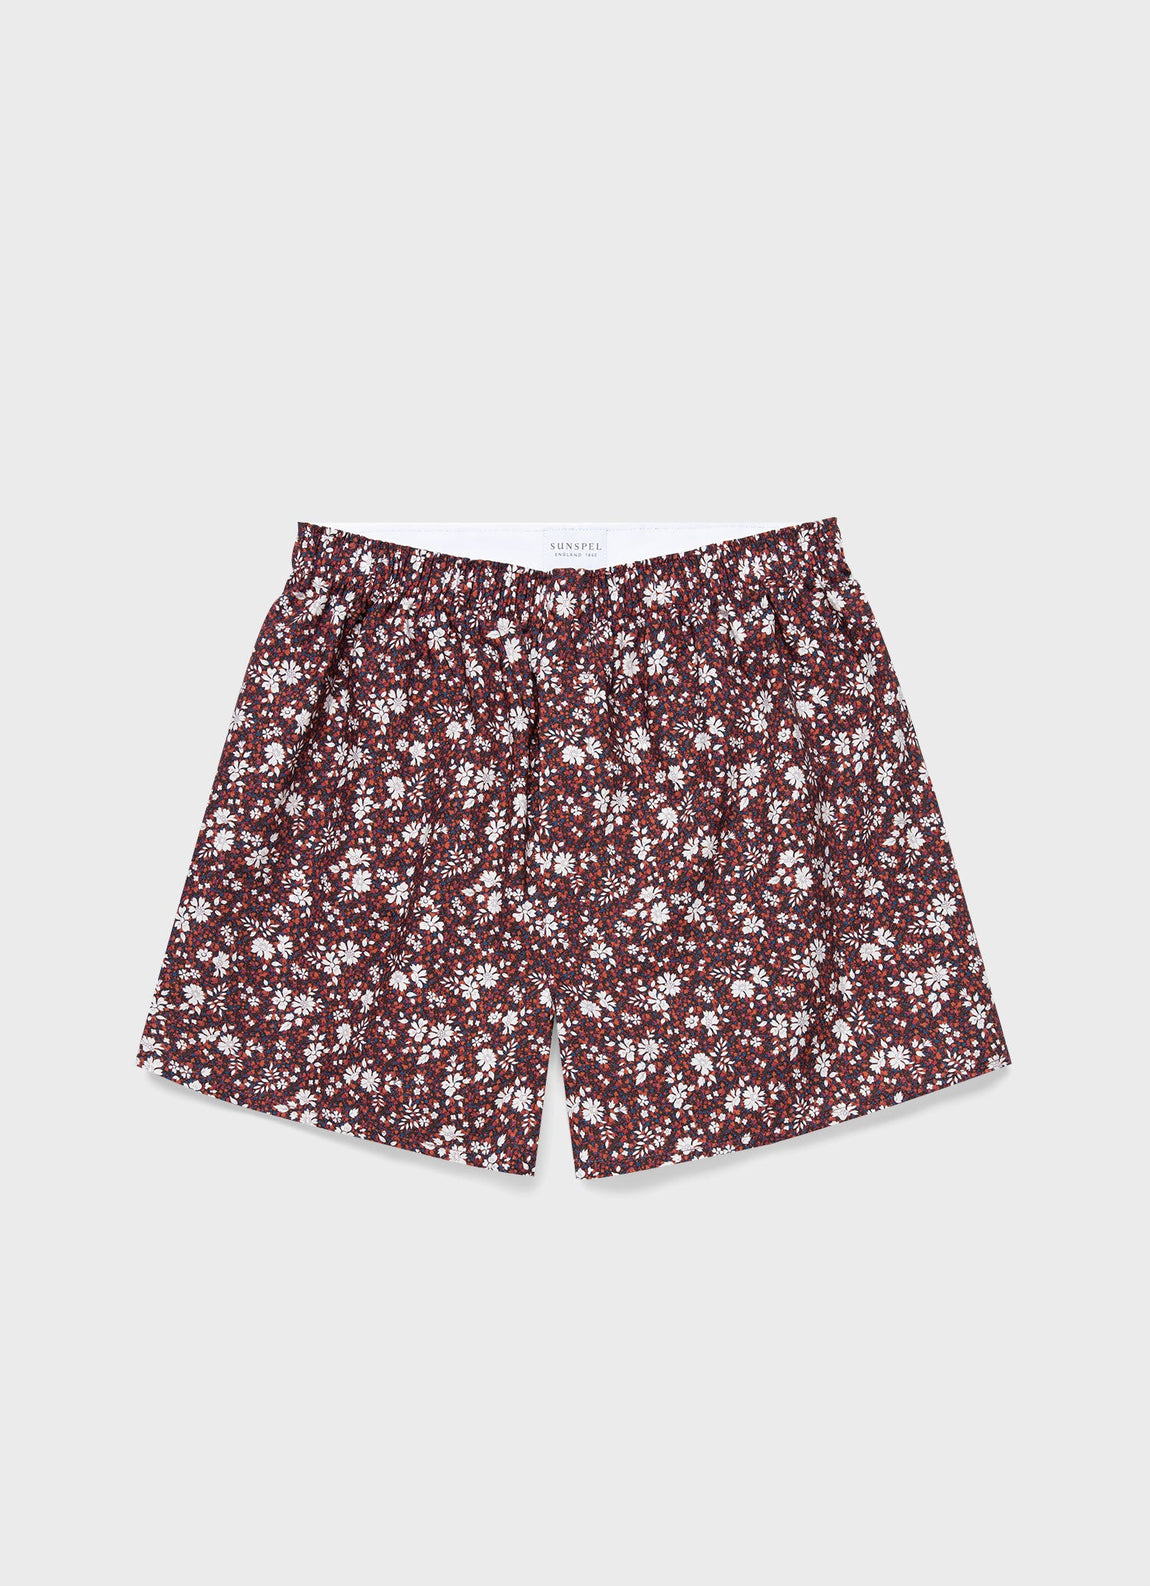 Men's Classic Boxer Shorts in Liberty Fabric Red Pepper Floral